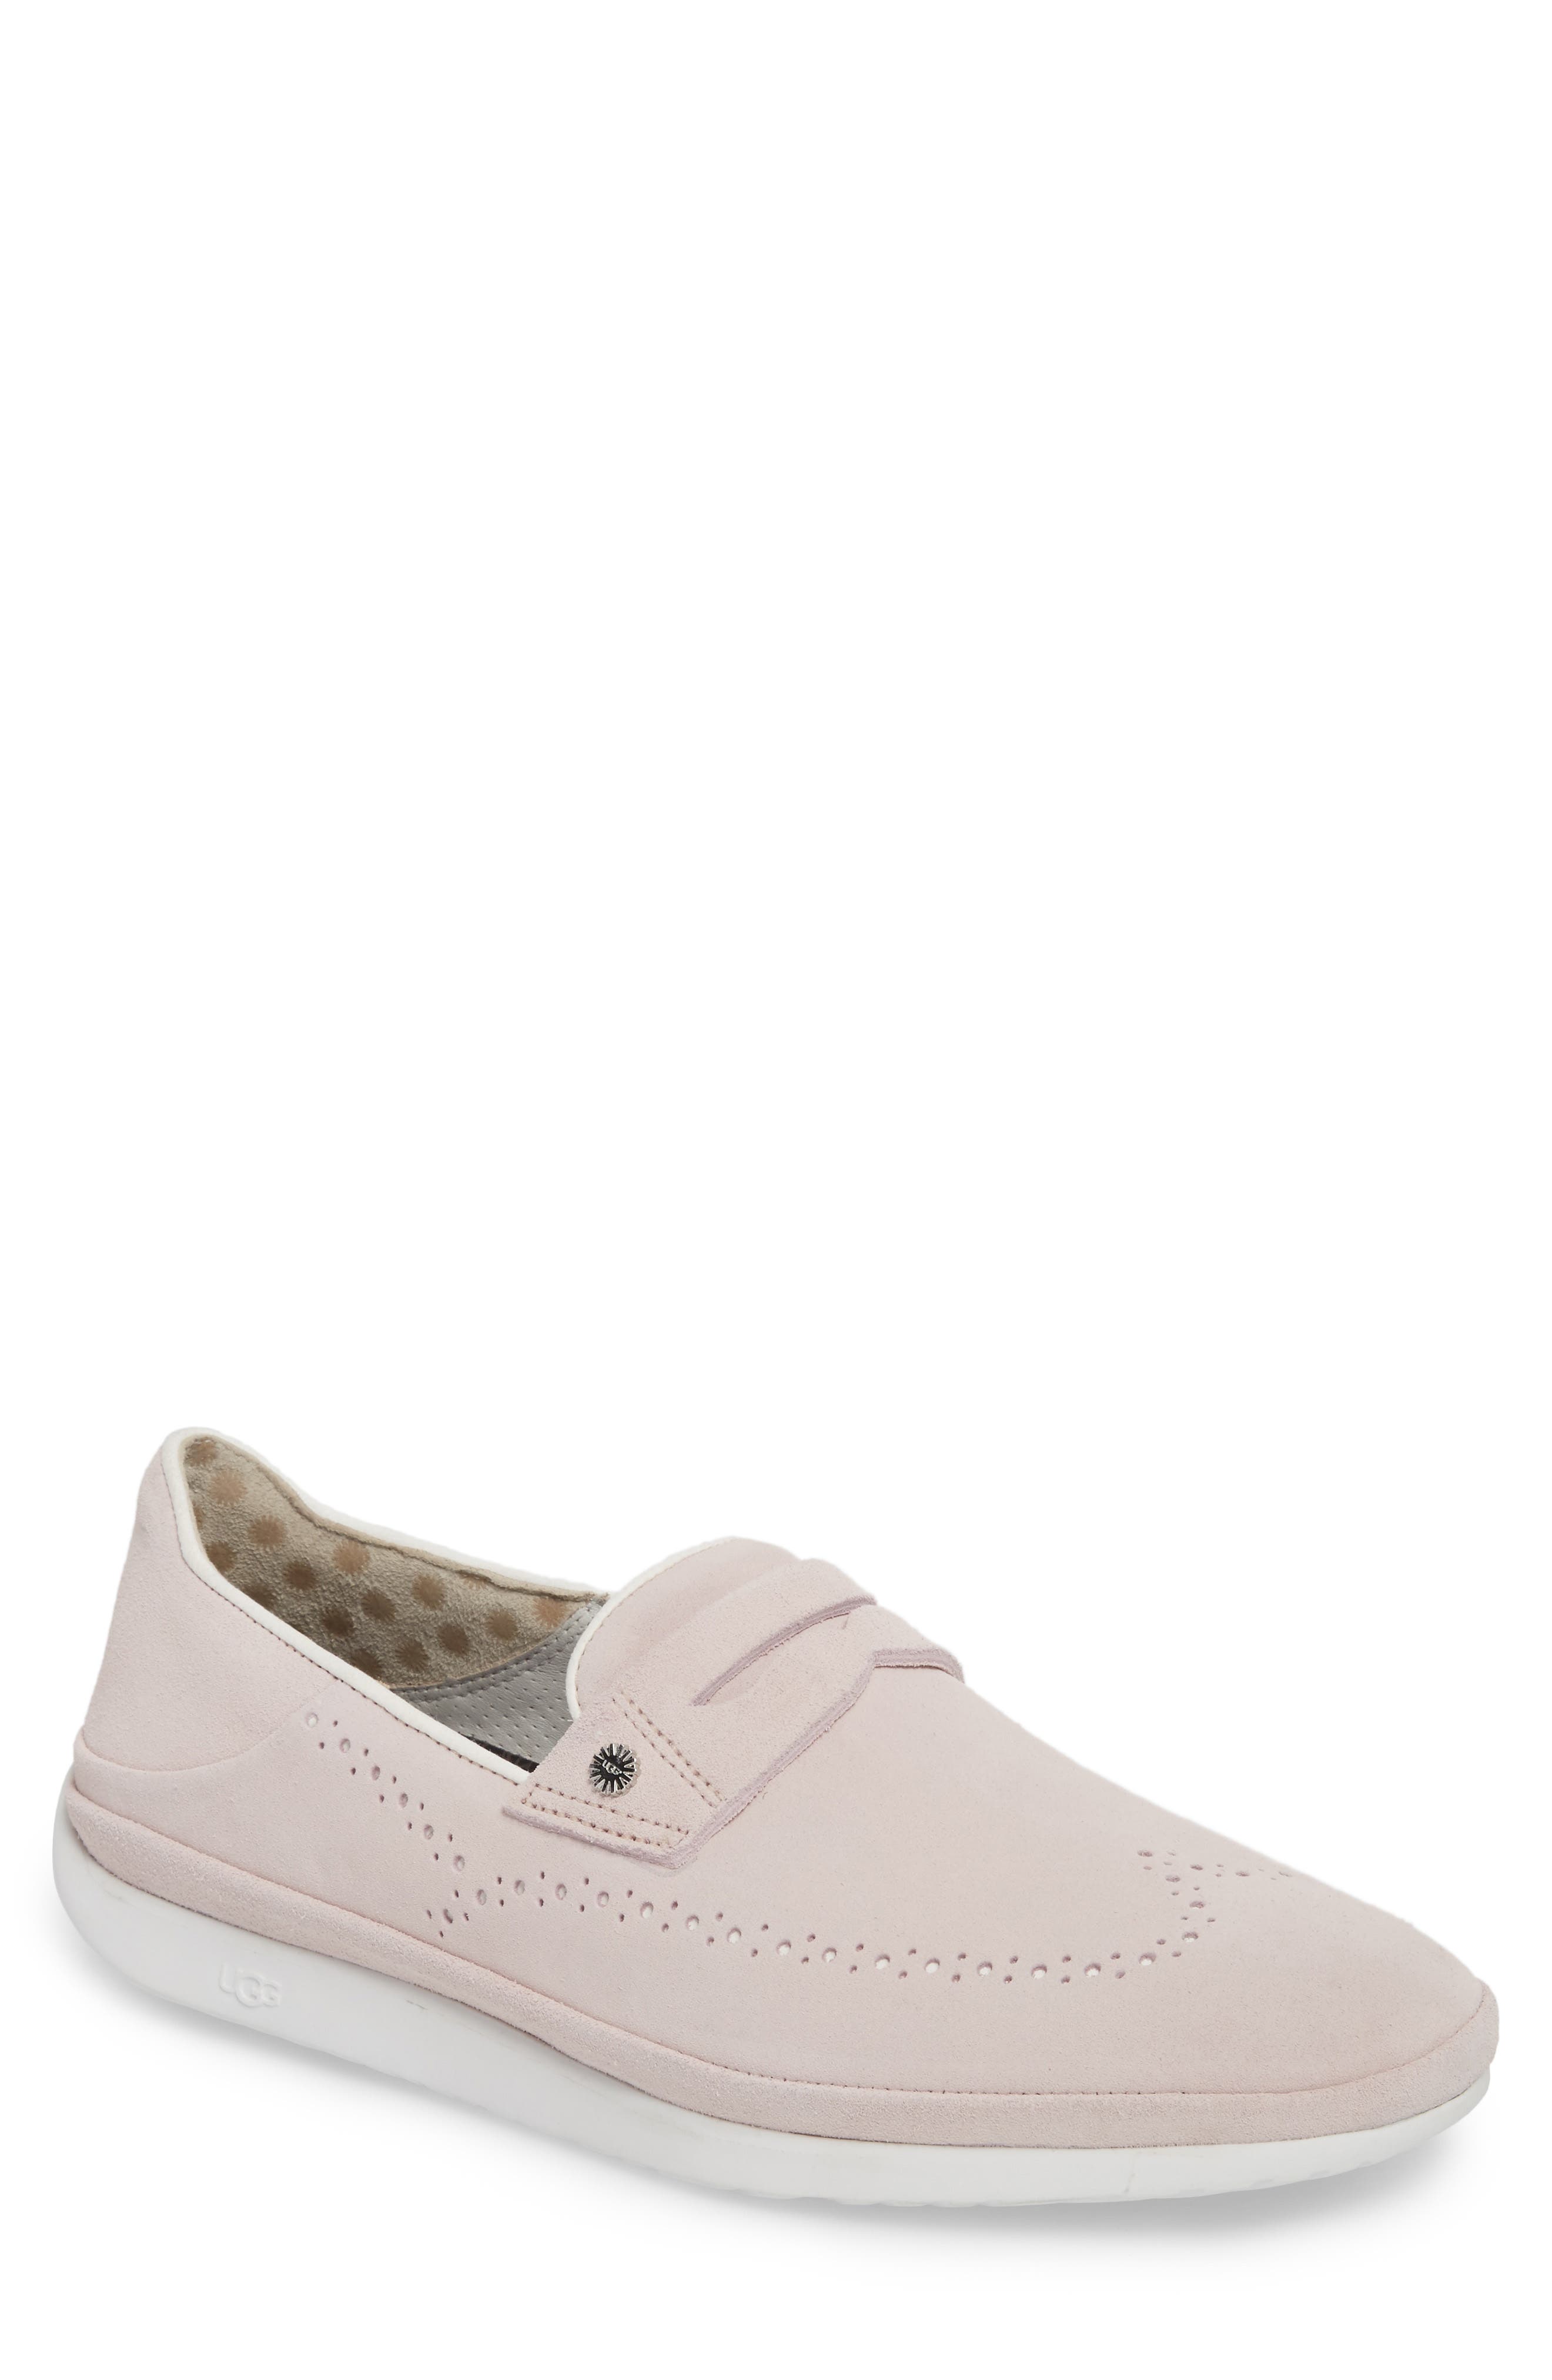 boys pink loafers